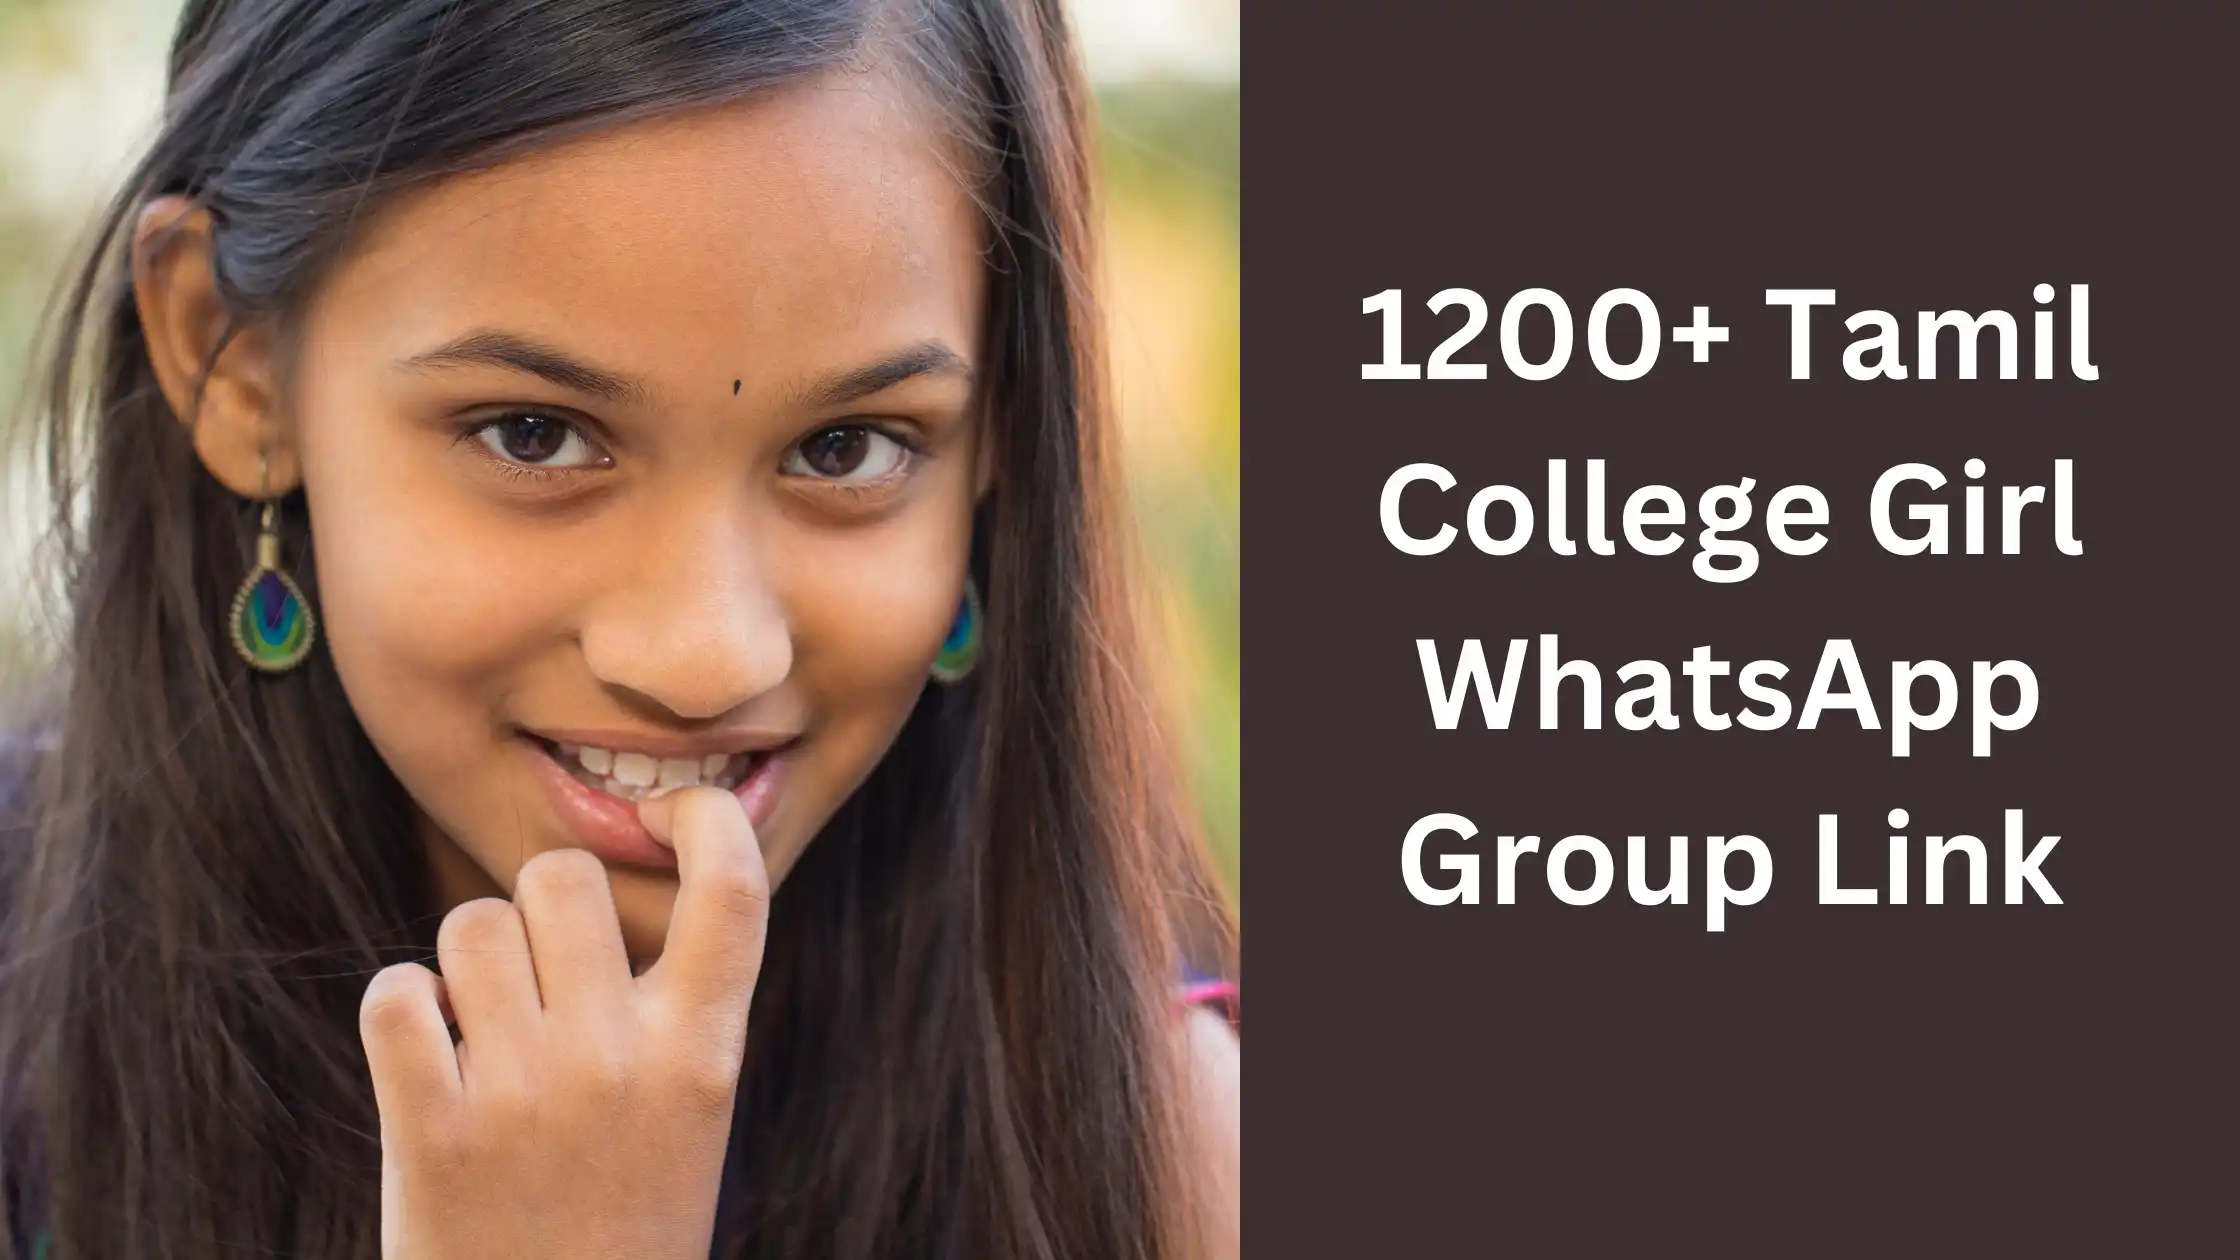 1200+Tamil College Girl WhatsApp Group Link